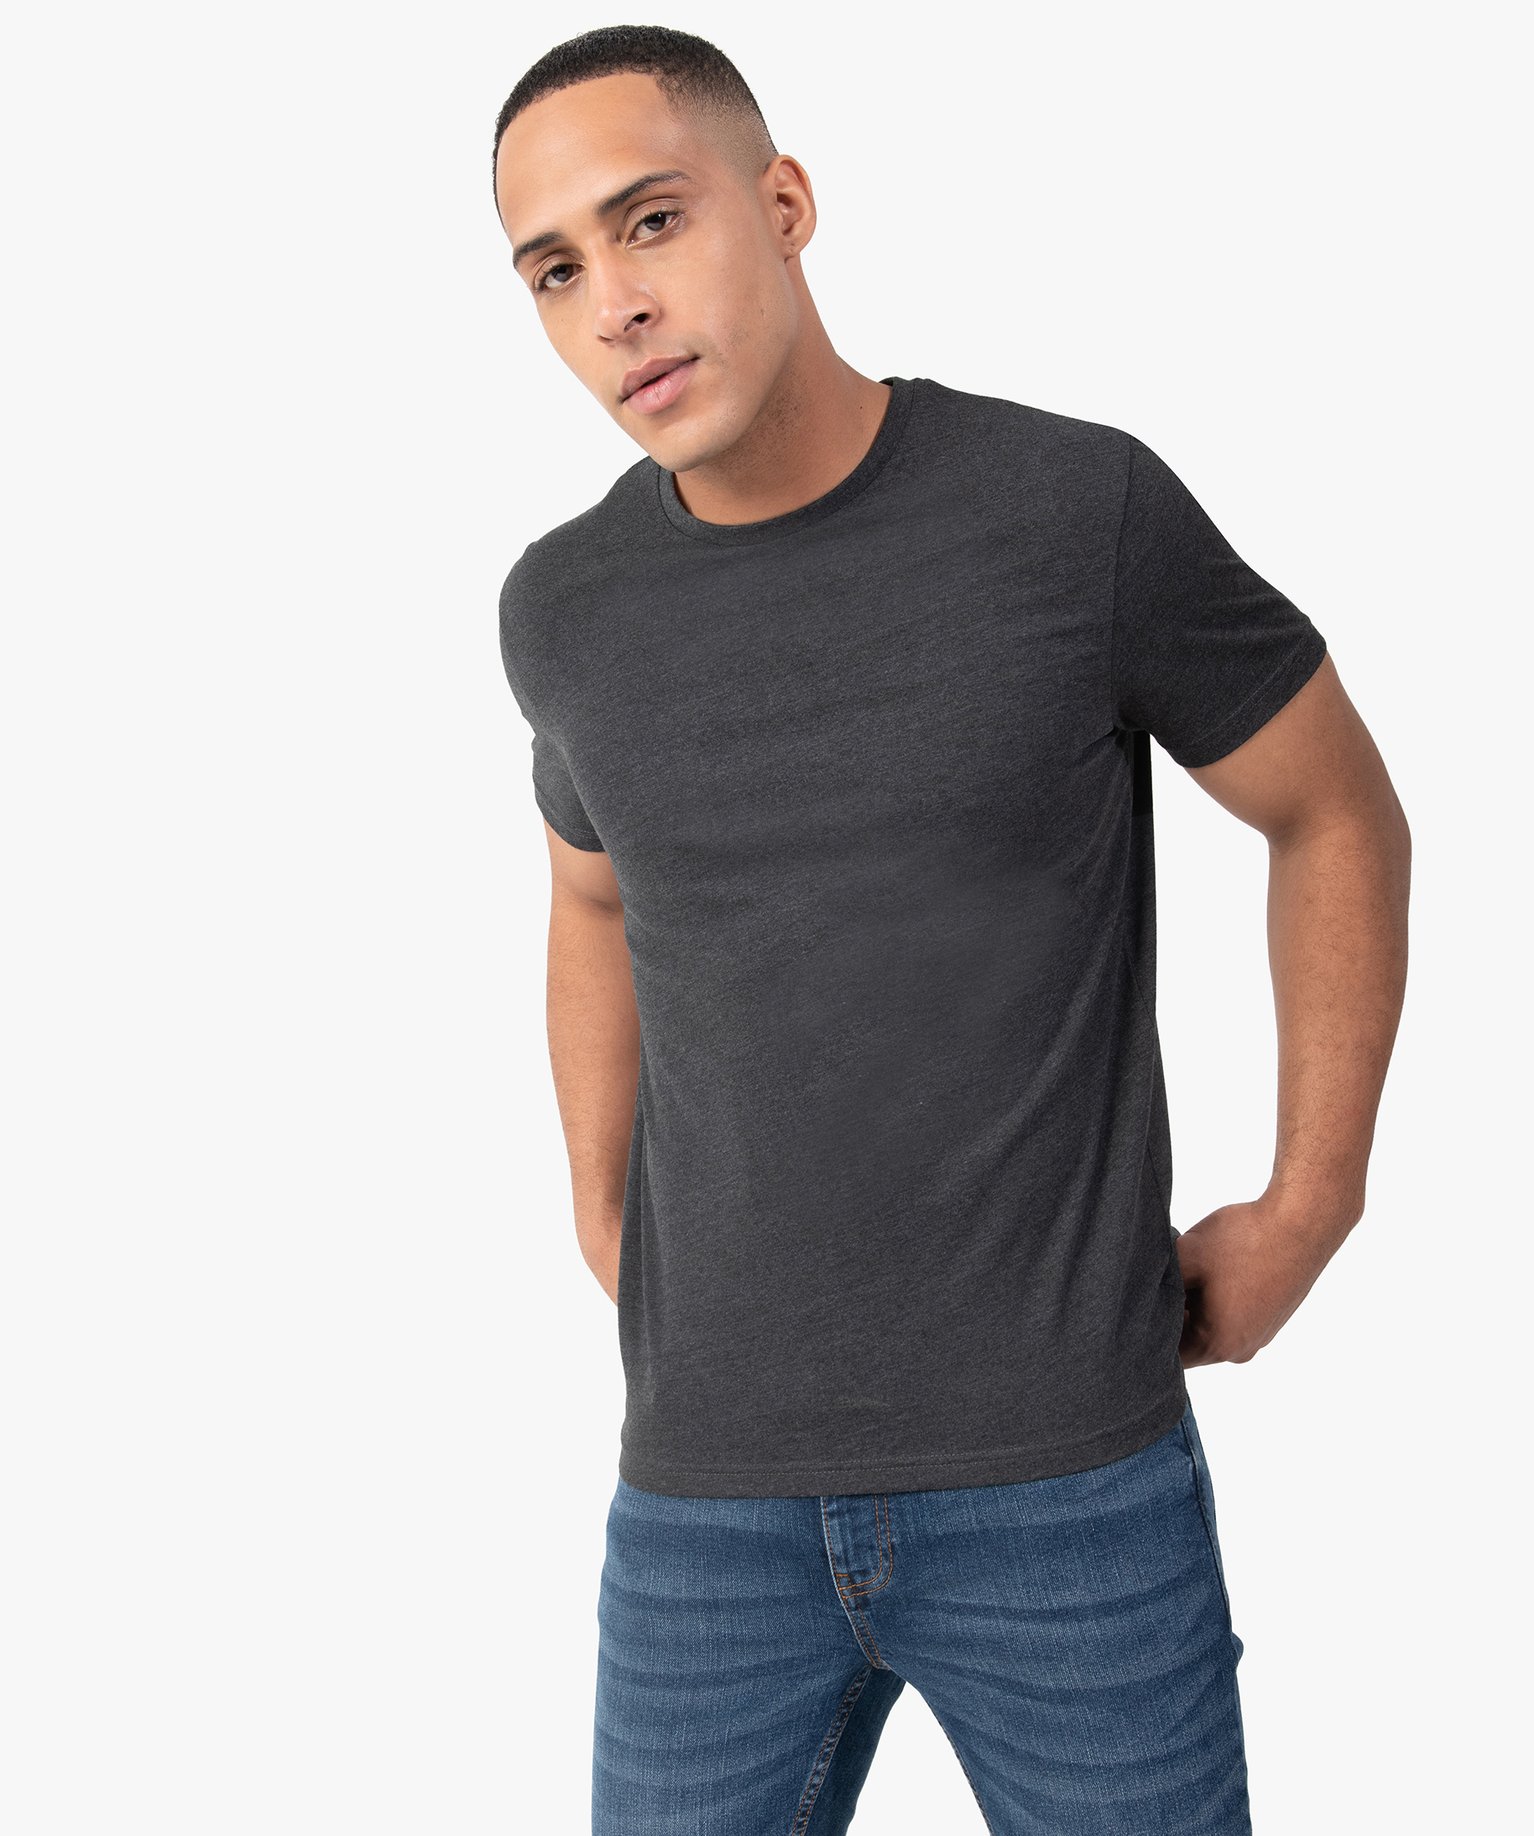 tee-shirt a manches courtes et col rond homme gris tee-shirts